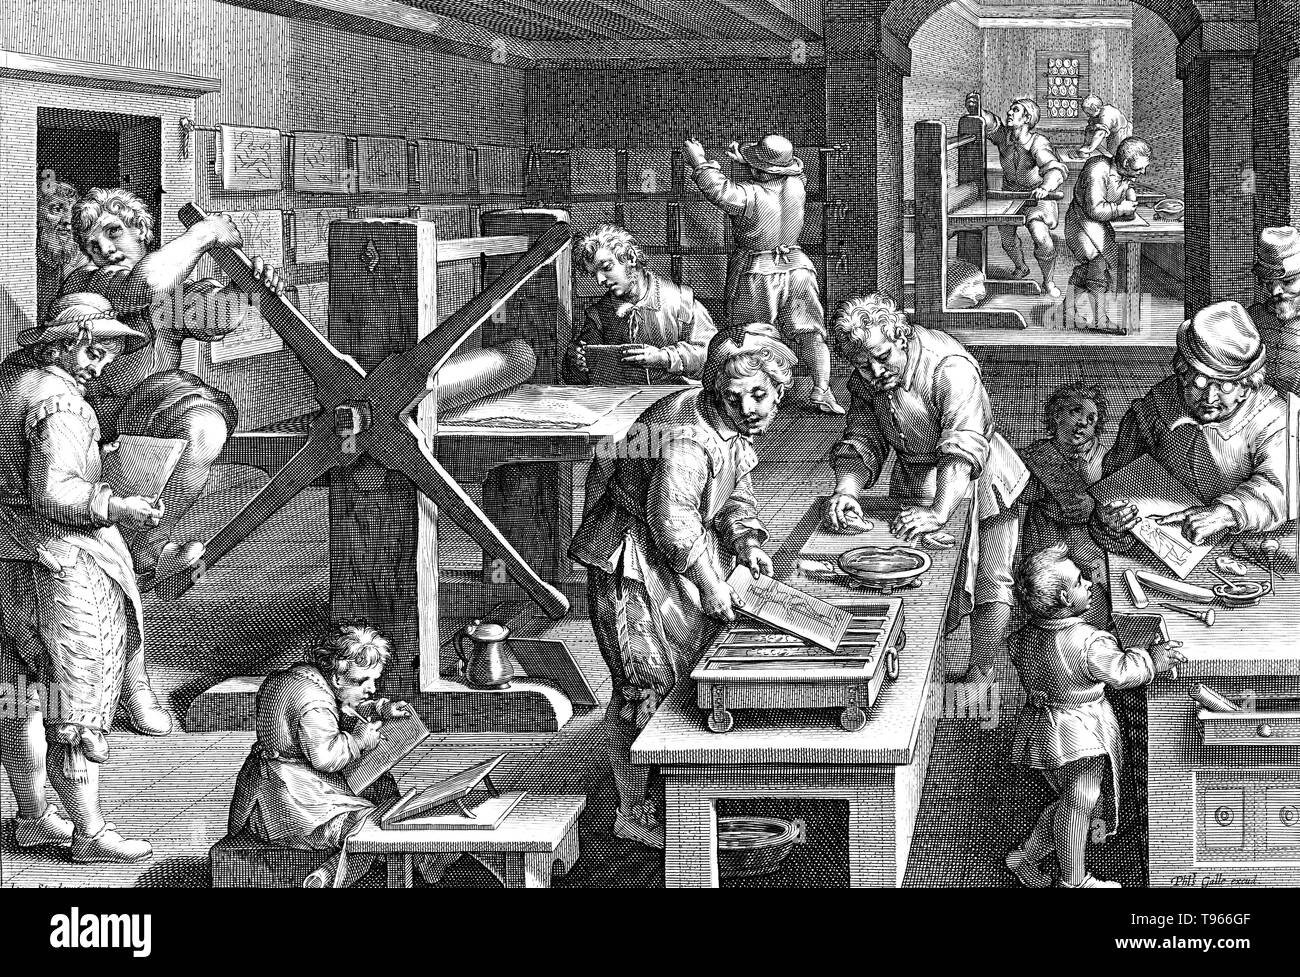 PLATE 19. The Invention of Copper Engraving. Nineteenth plate from a print series entitled Nova Reperta (New Inventions of Modern Times) consisting of a title page and 19 plates, engraved by Jan Collaert I, after Jan van der Straet, called Stradanus, and published by Philips Galle. Illustration of men making copper engravings. Stock Photo